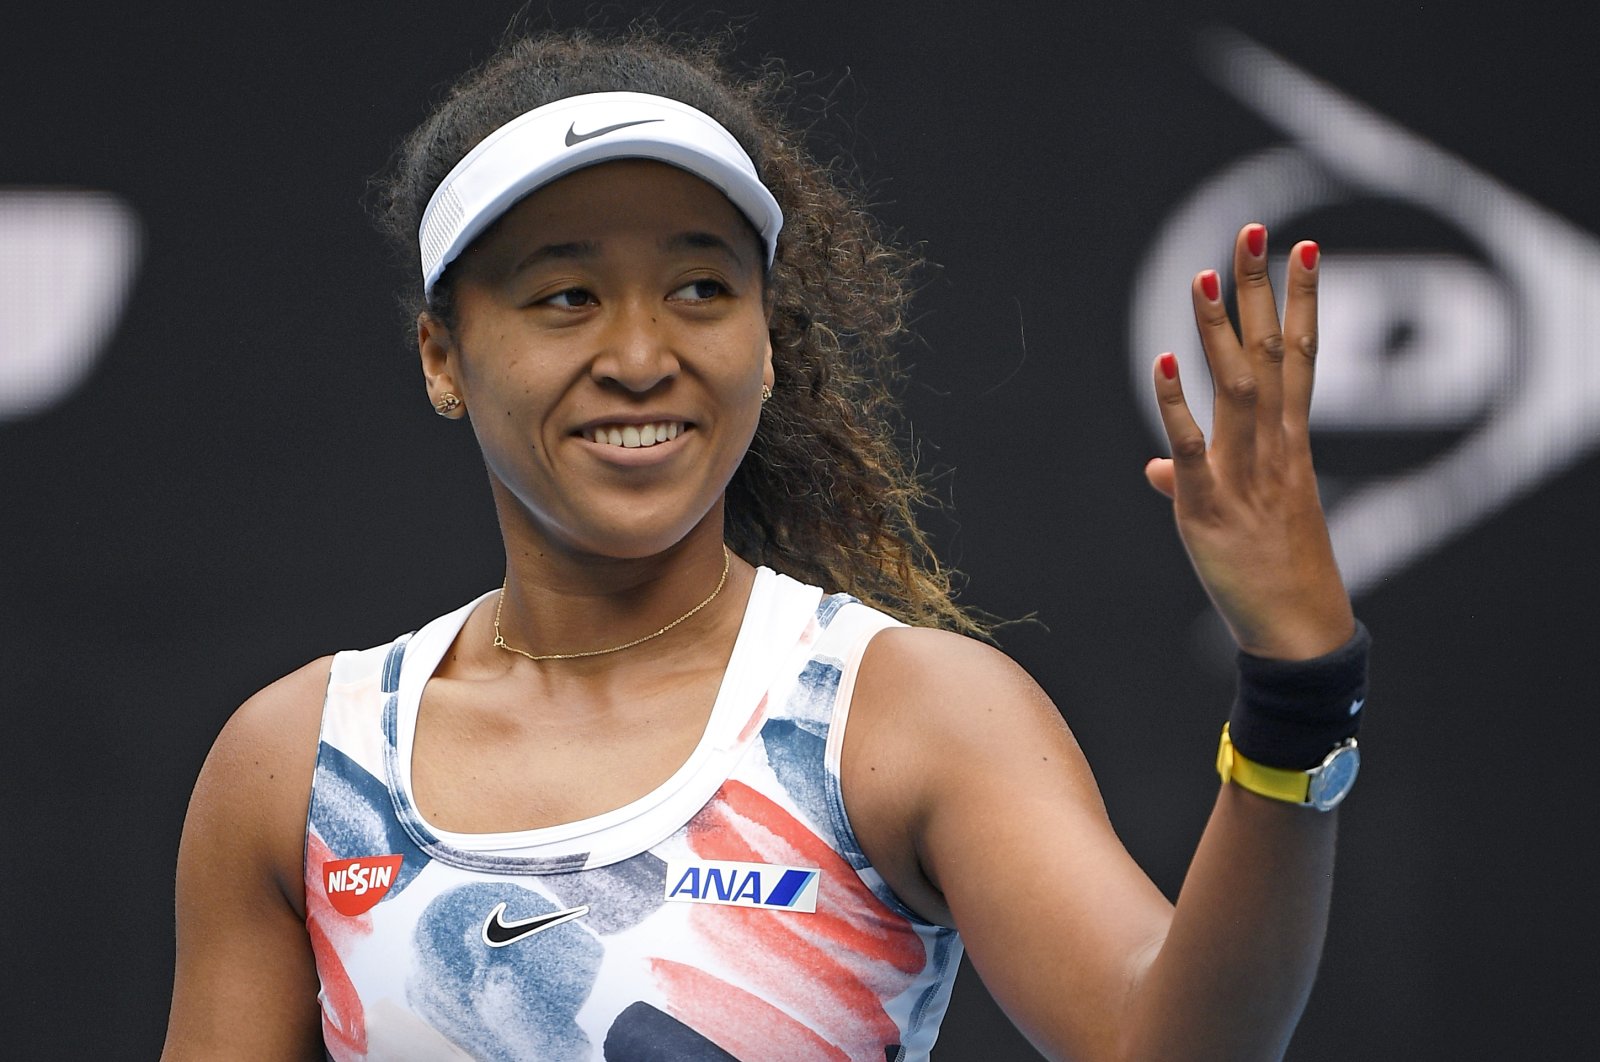 Japan's Naomi Osaka reacts after defeating China's Zheng Saisai in their second-round singles match at the Australian Open tennis championship, Melbourne, Australia, Jan. 22, 2020. (AP Photo)